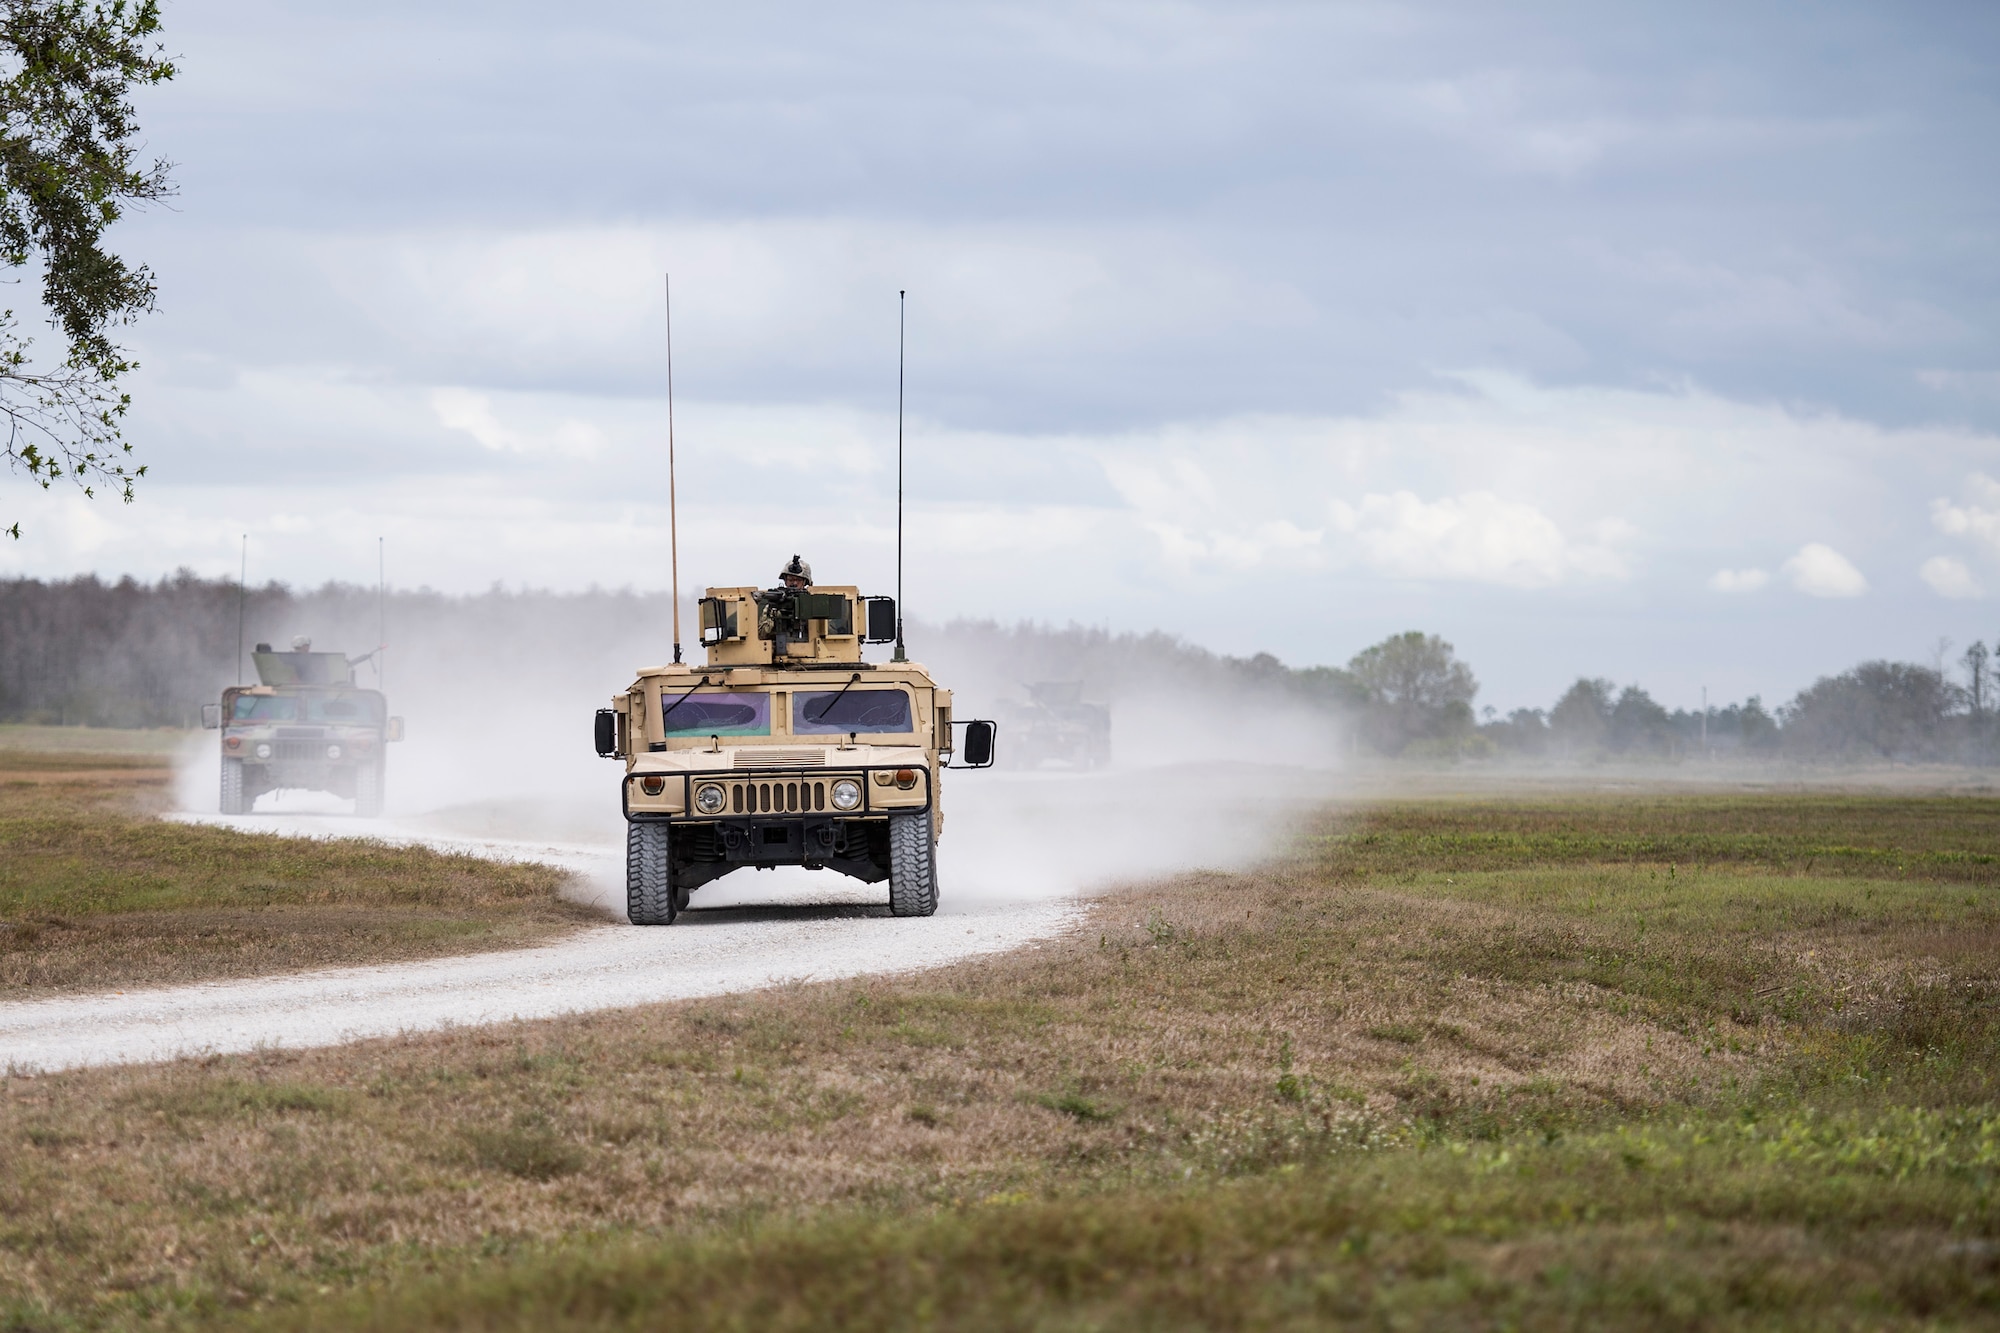 Airmen take Humvee out on patrol in response to reports of suspicious activity in a nearby village during a Mission Readiness Exercise, March 7, 2017, at Avon Park Air Force Range, Fla. The MRX took place March 2-13 and ensured the 822d Base Defense Squadron could efficiently deploy anywhere in the world in less than 72 hours. During the two week MRX, the squadron was evaluated on its ability to set-up a bare base, effectively thwart enemy attacks, run a secure Tactical Operation Center and maintain positive relationships with villagers in surrounding areas. (U.S. Air Force Photo by Airman 1st Class Janiqua P. Robinson)